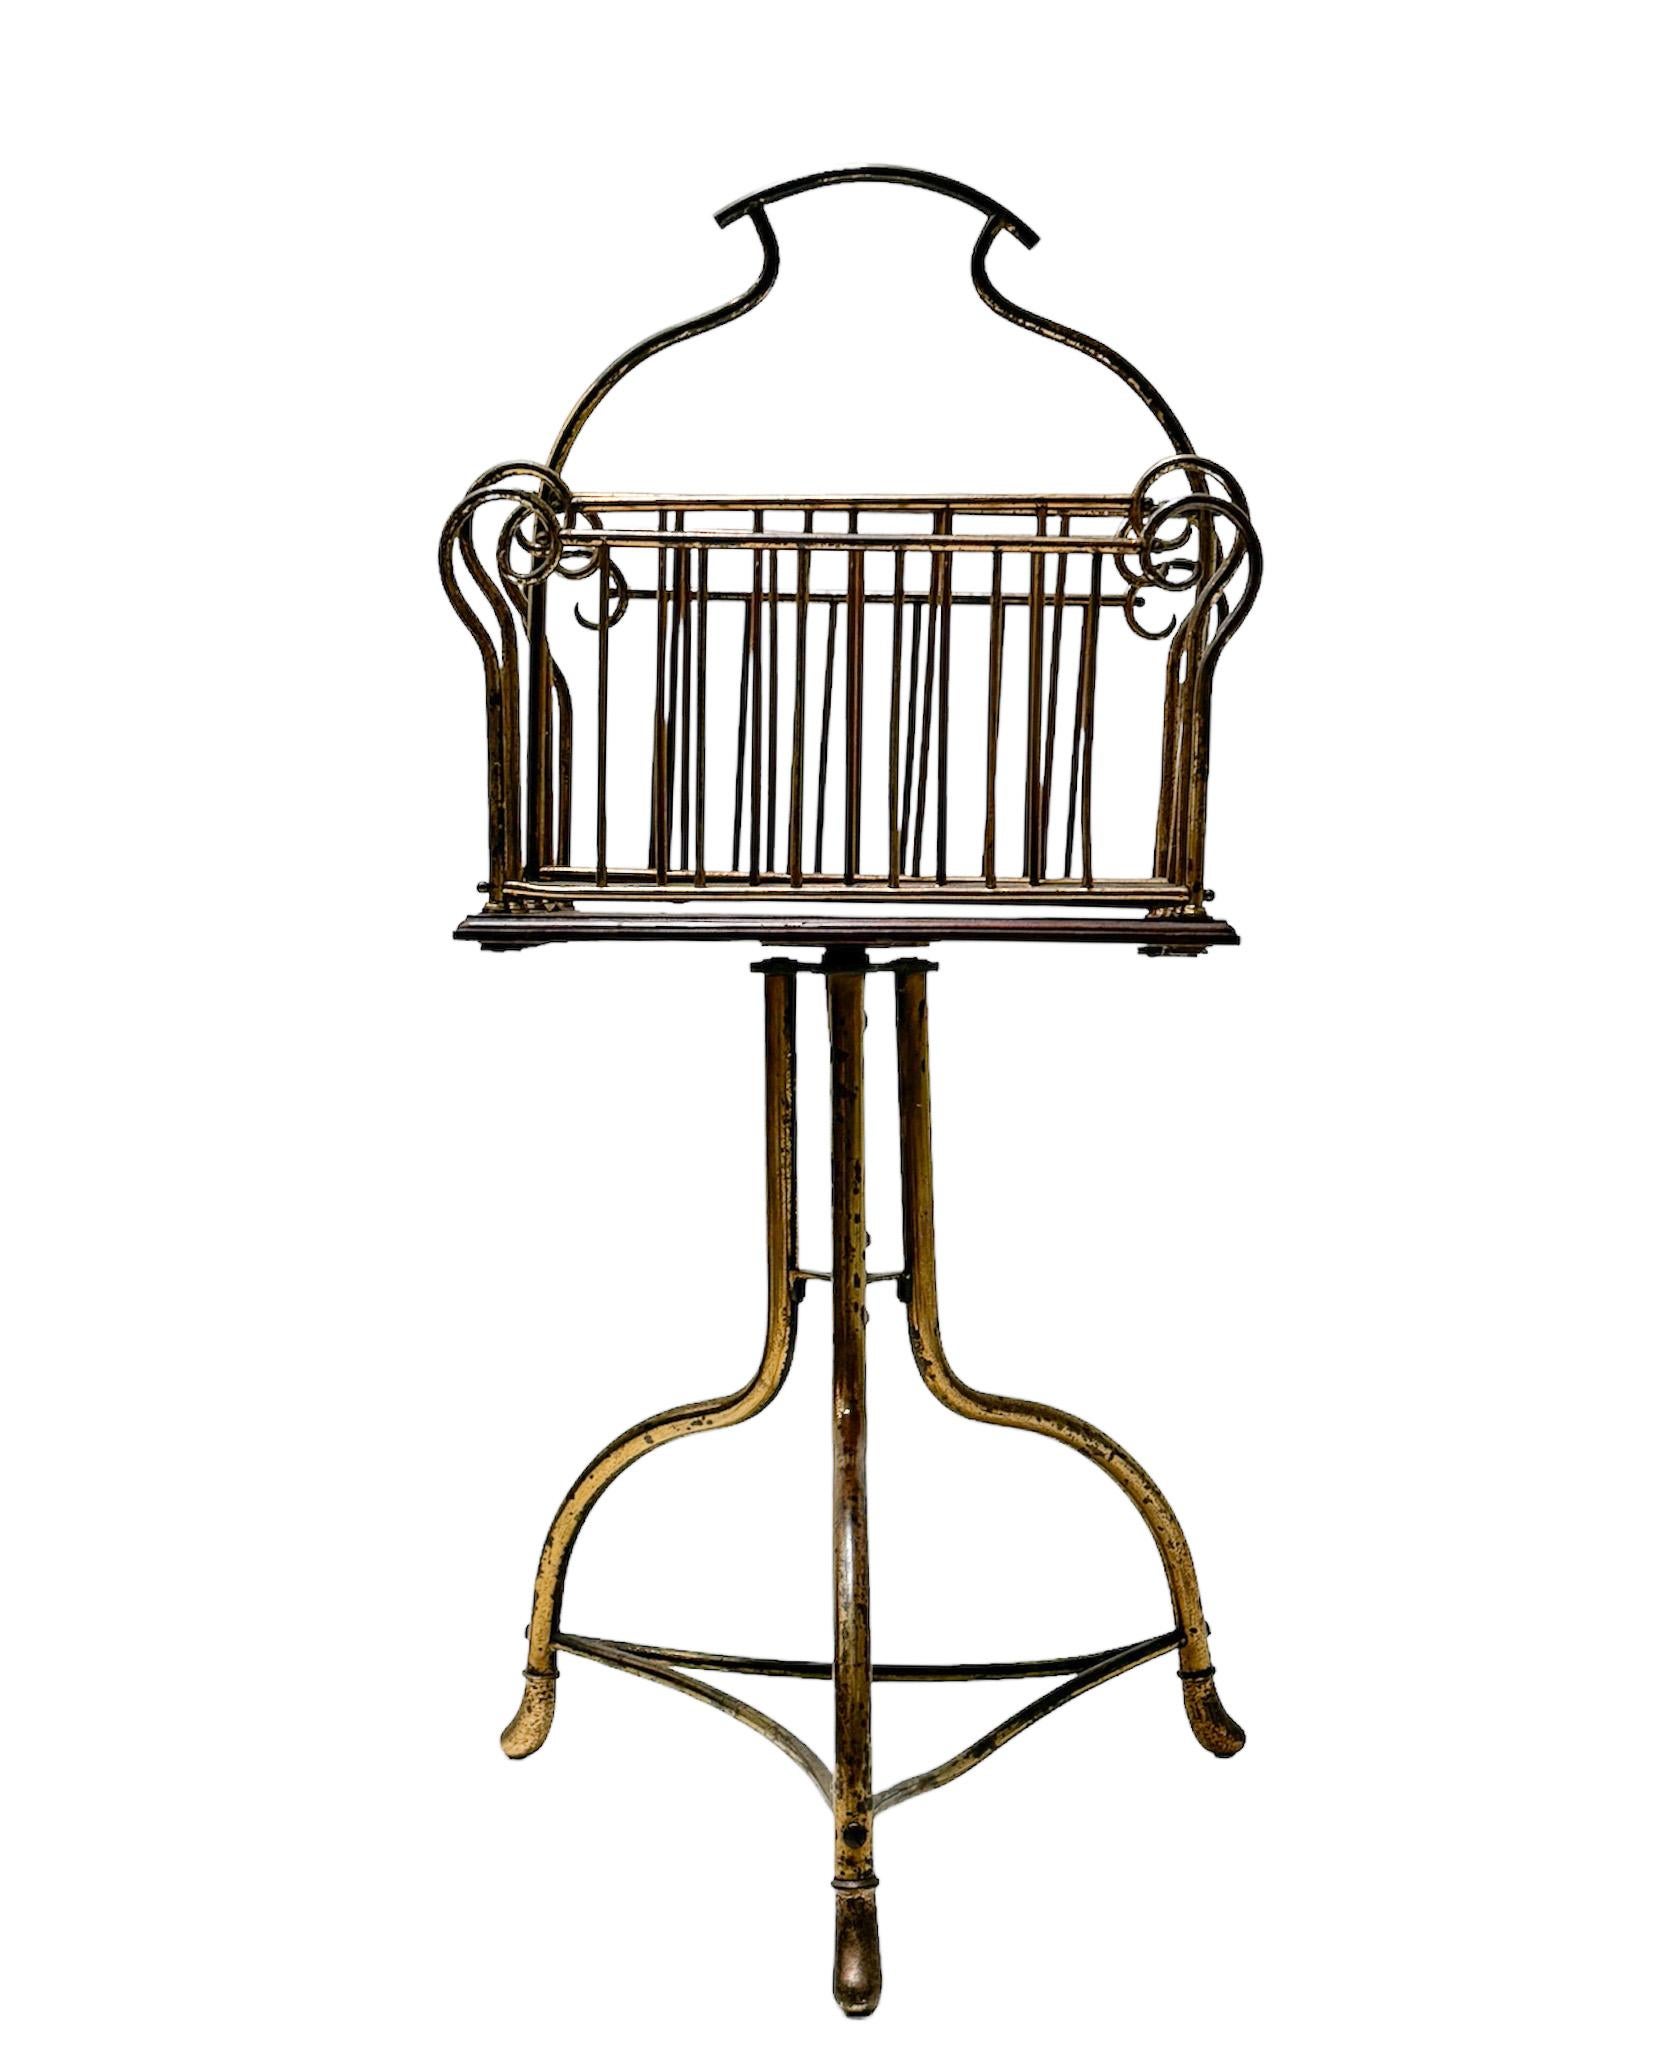 Stunning and elegant Art Nouveau revolving magazine rack.
Striking English design from the 1900s.
Patinated brass and walnut frame on a revolving stand.
This wonderful Art Nouveau revolving magazine rack is in good original condition with minor wear